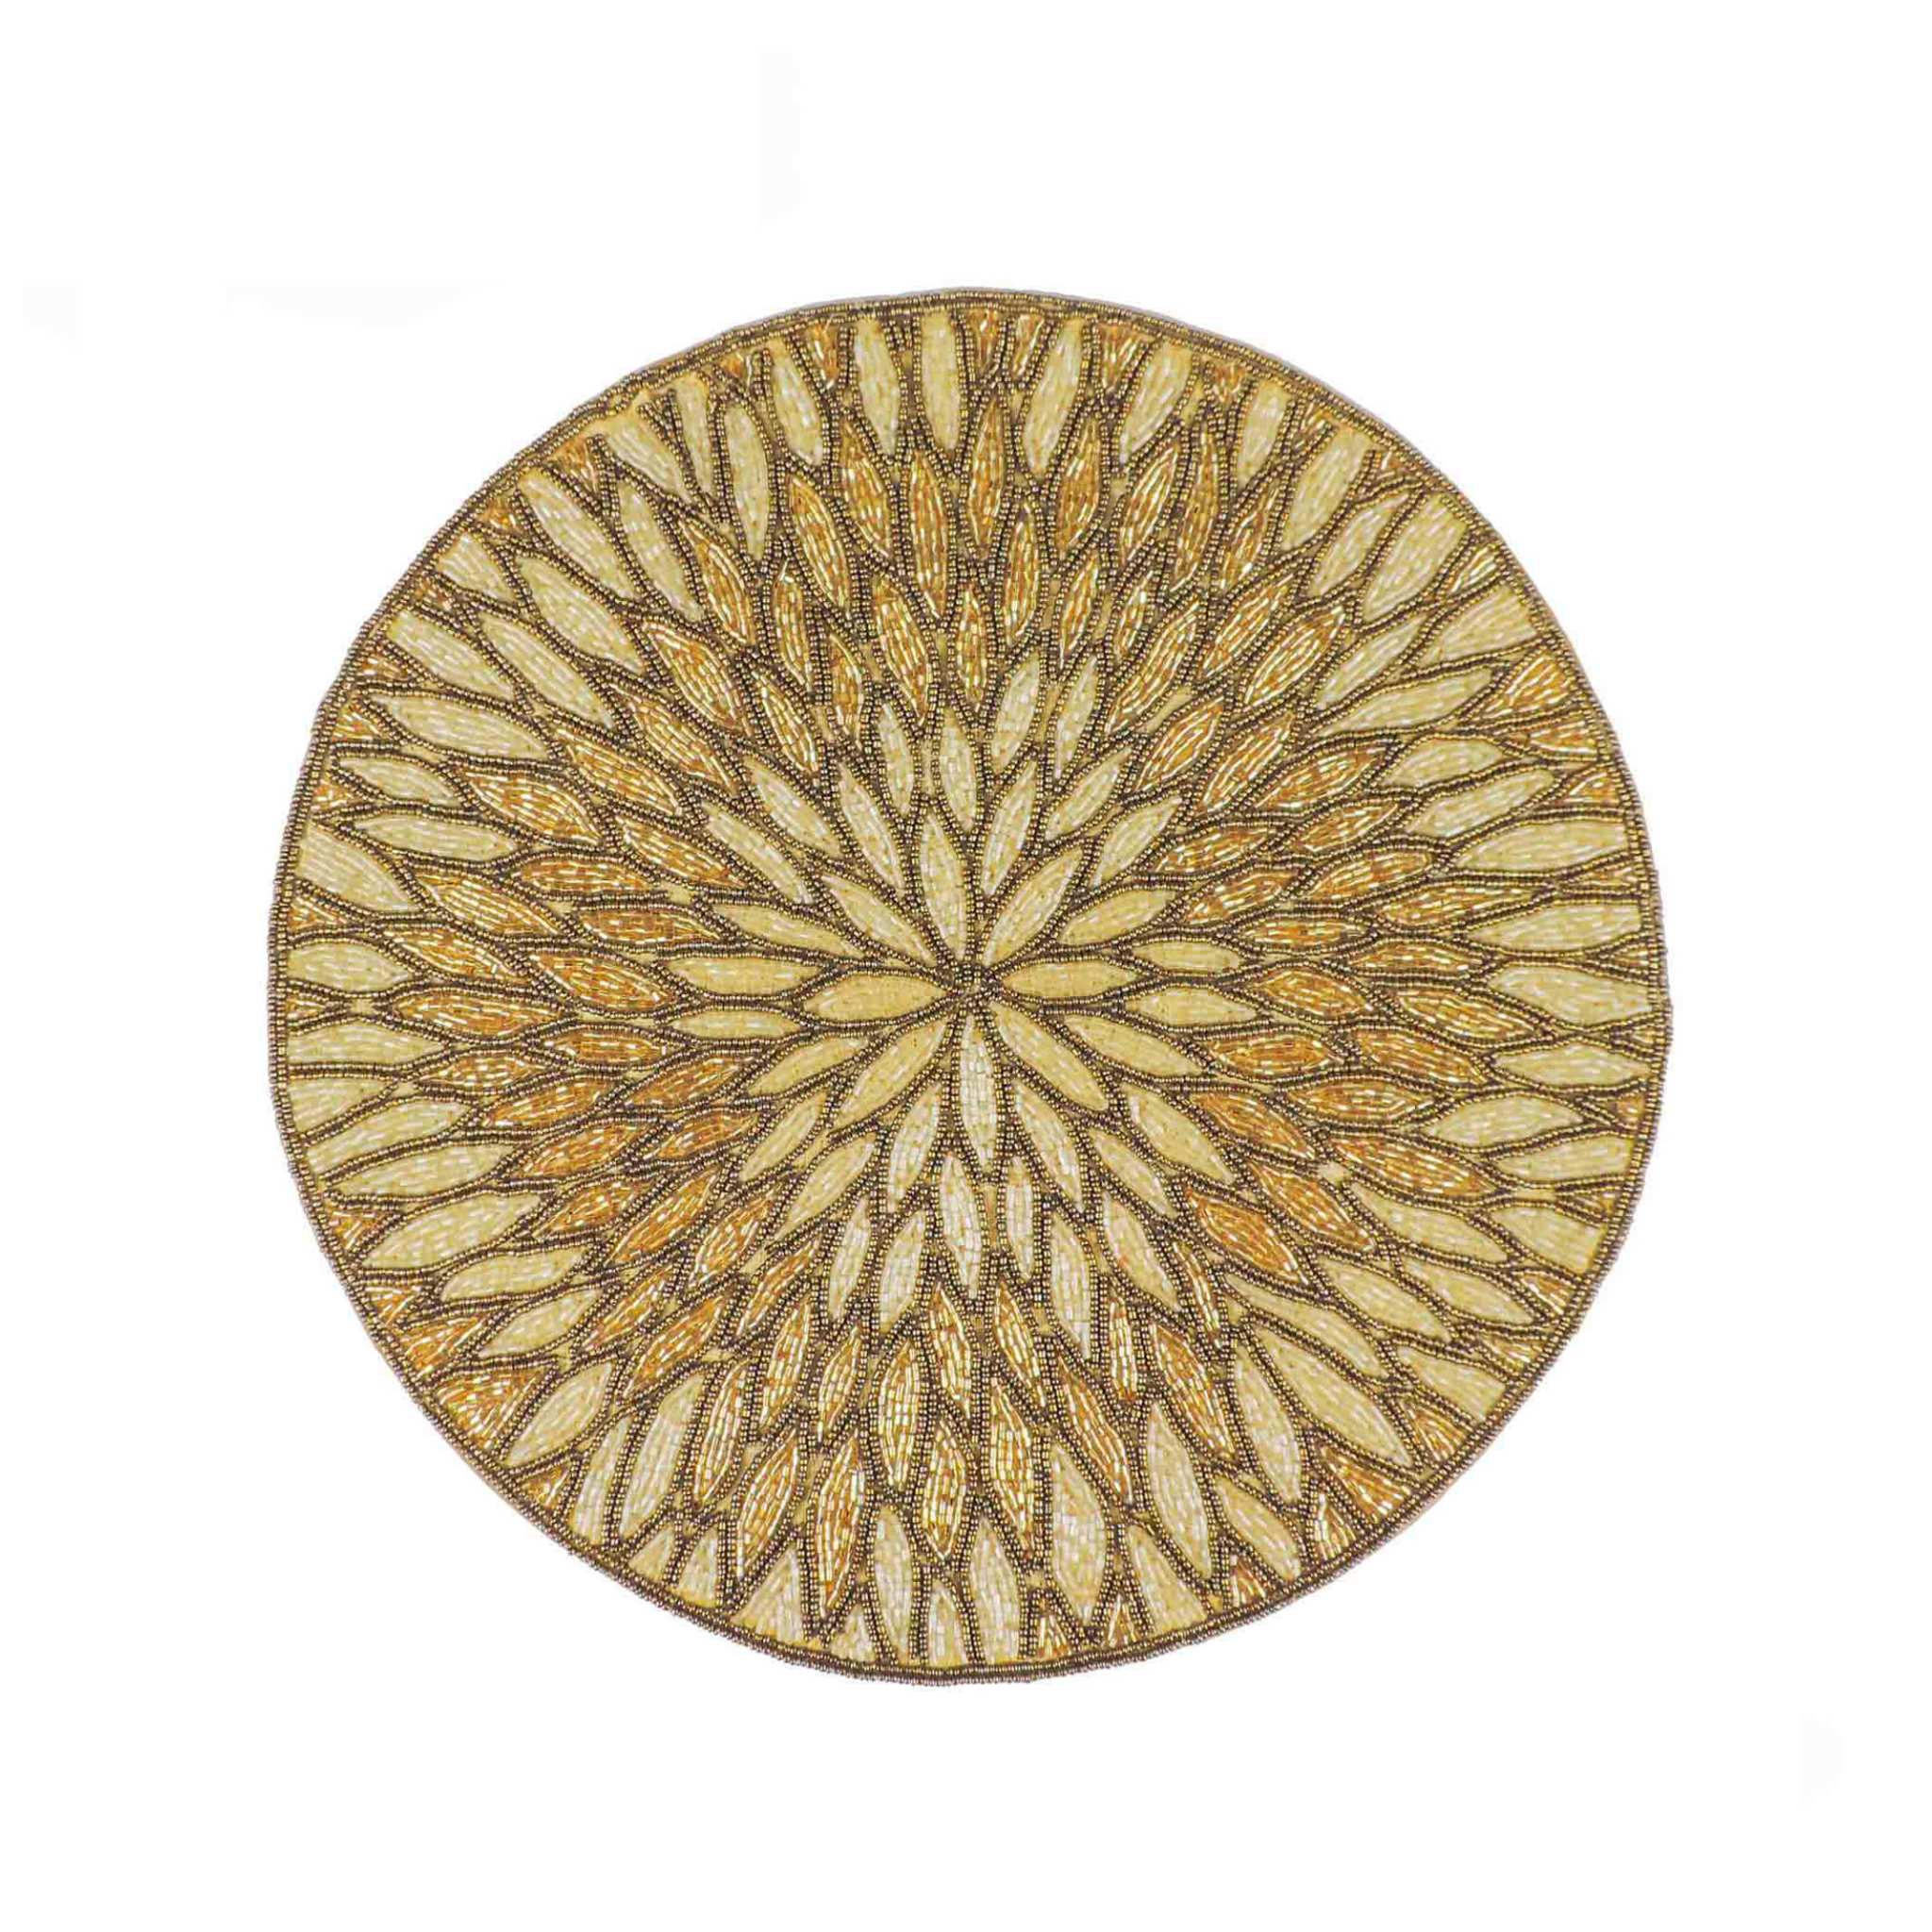 Chrysanthemum Bead Embroidered Placemat in Gold, Set of 2